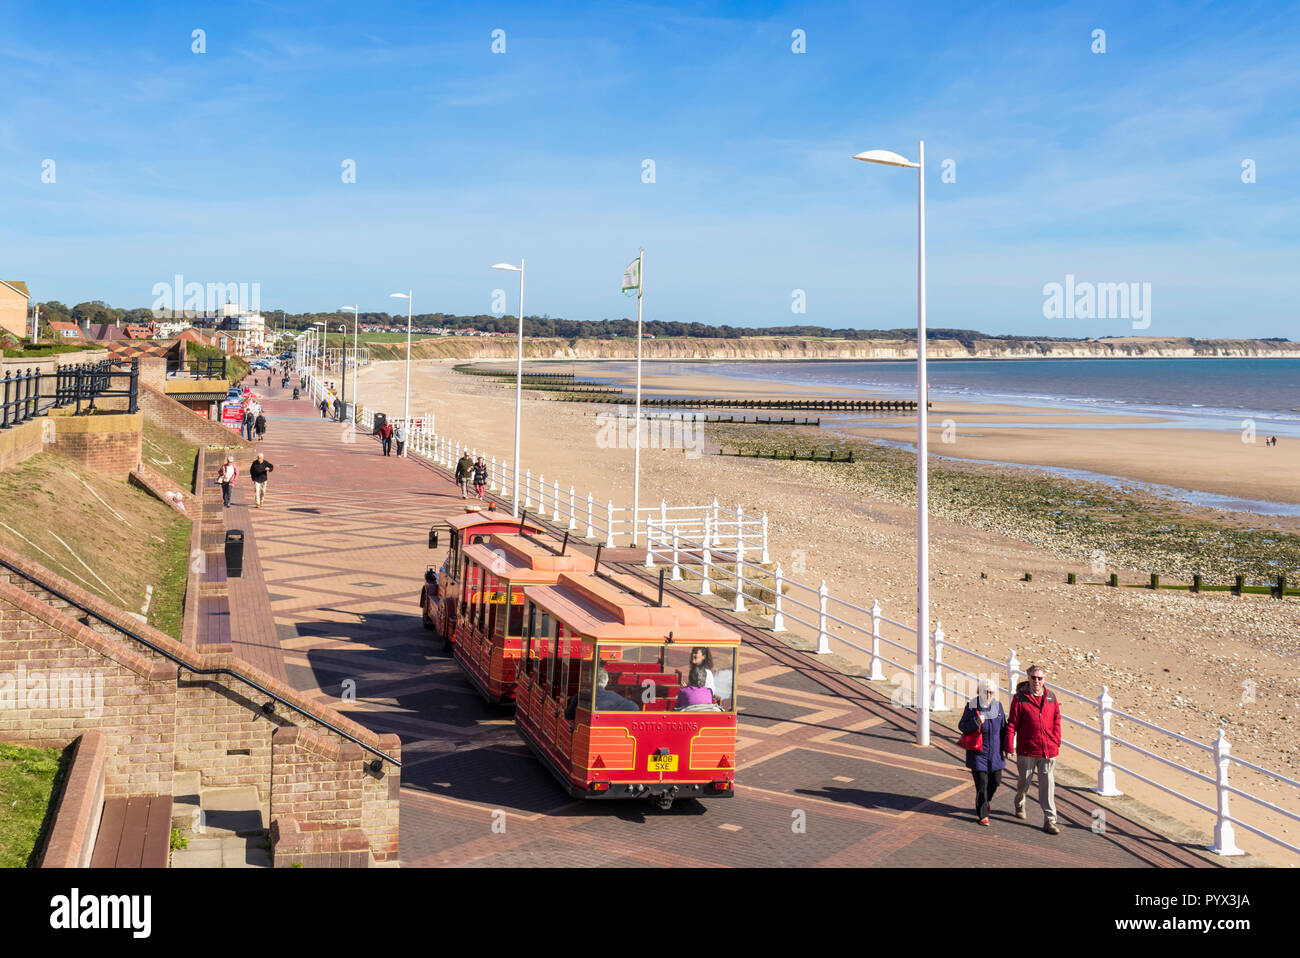 Bridlington beach Yorkshire with the Land train on the promenade at  South Marine drive East Riding of Yorkshire England UK GB Europe Stock Photo